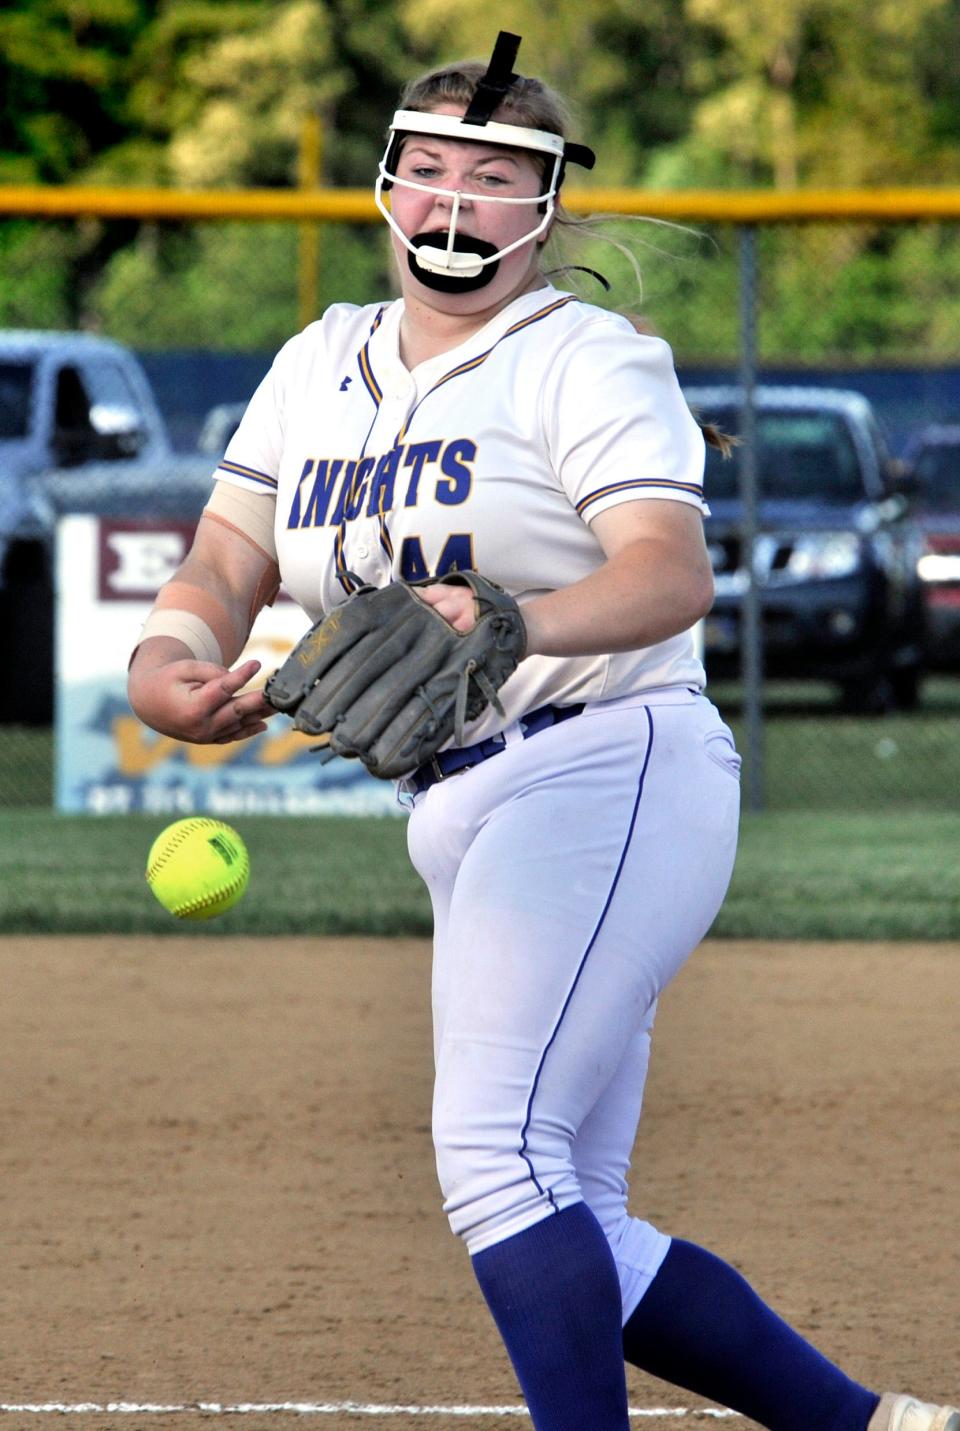 Pitcher Madge Layfield is among the top returning players for Sussex Central, which opens the season ranked No. 2 statewide in softball.